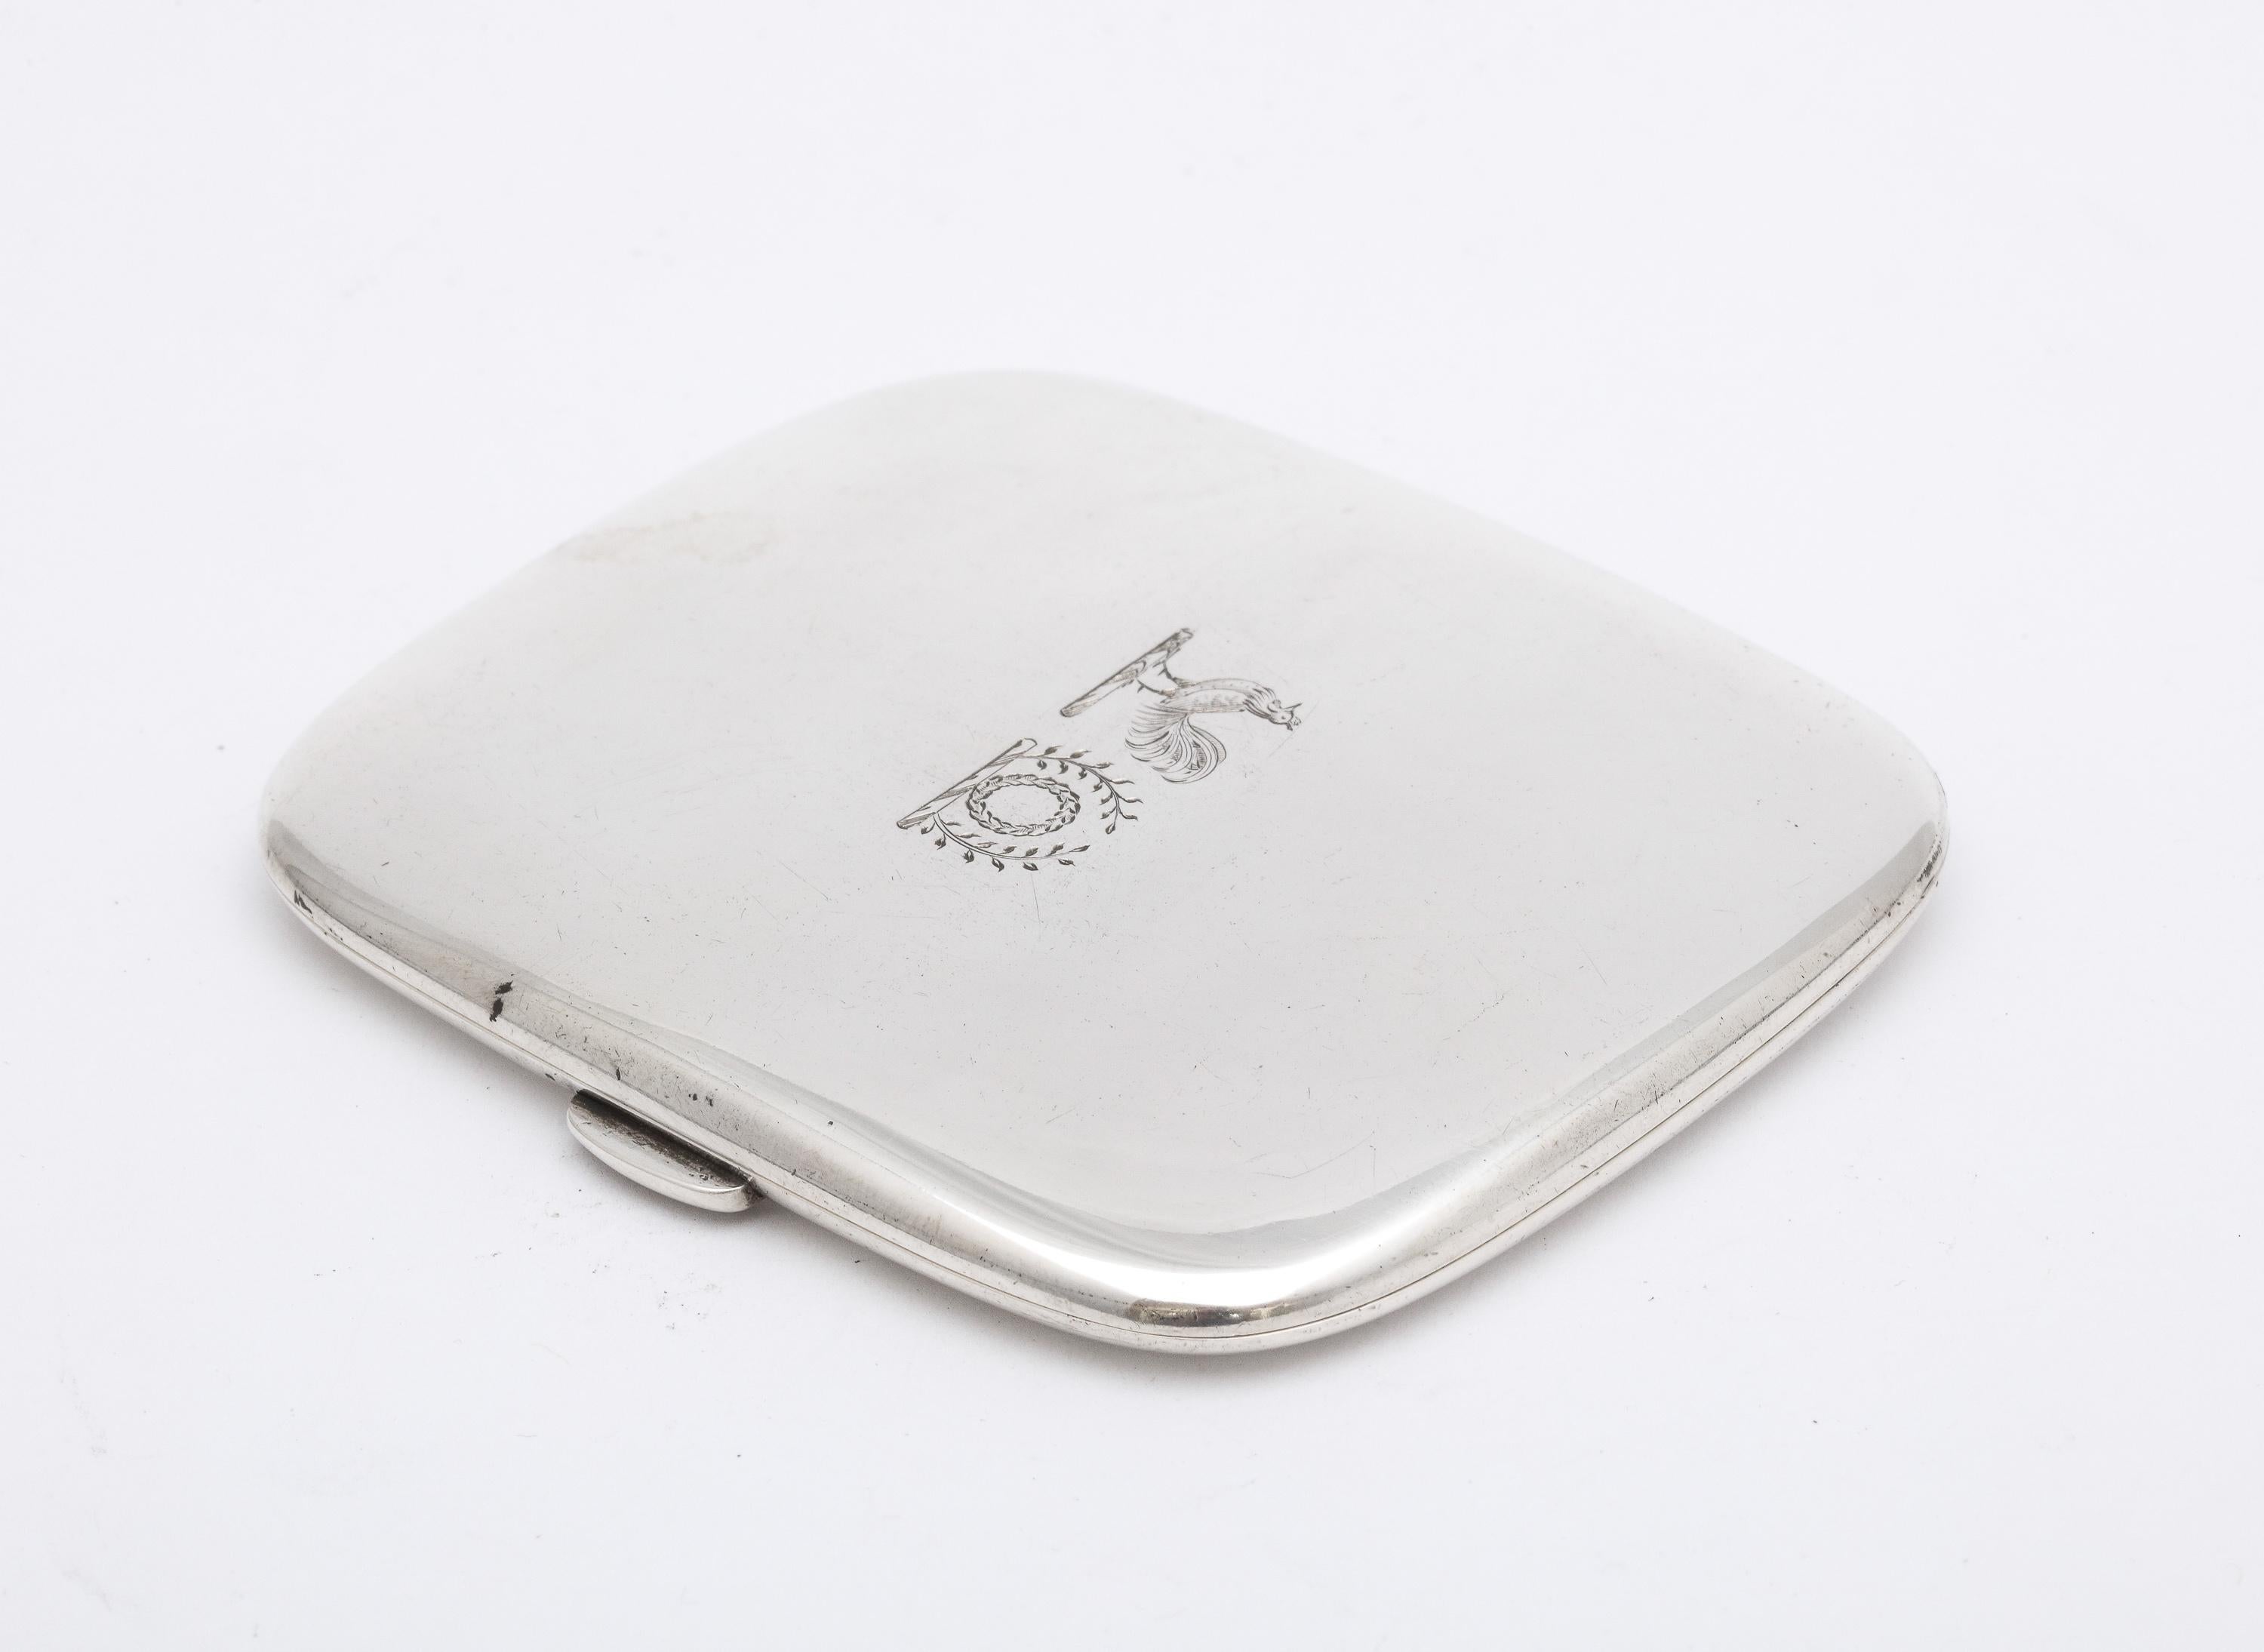 Early 20th Century Ewardian Sterling Silver Cigarette Case Having Two Engraved Armorials